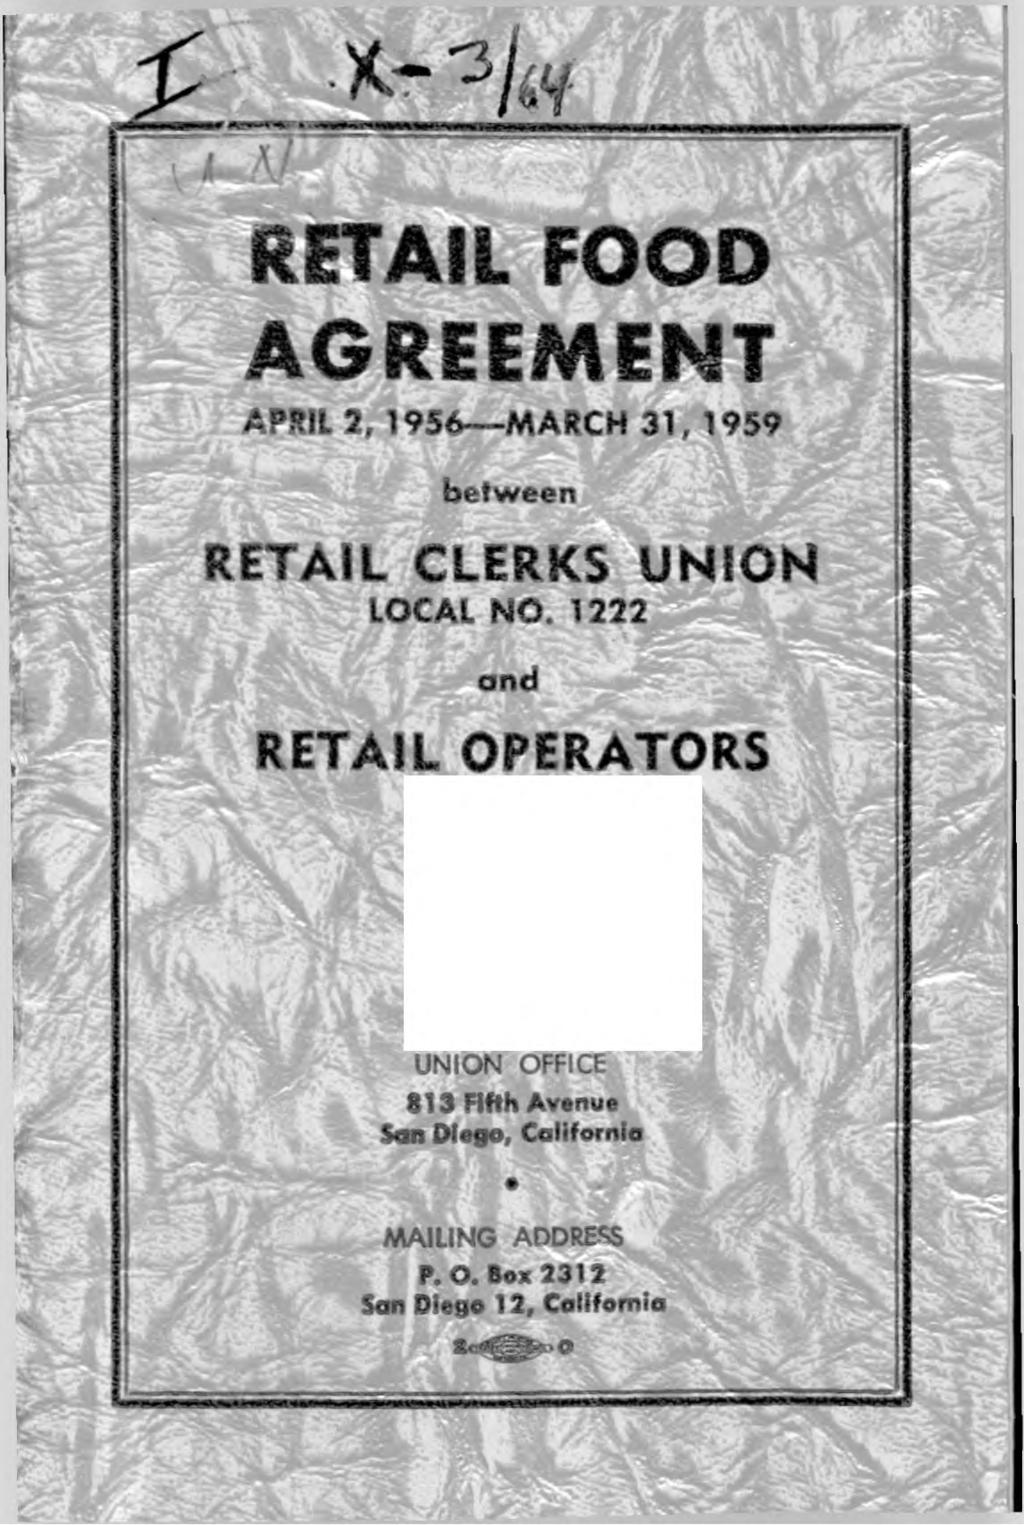 3T----- ------- i RETAIL FOOD AGREEMENT APRIL 2, 1956 MARCH